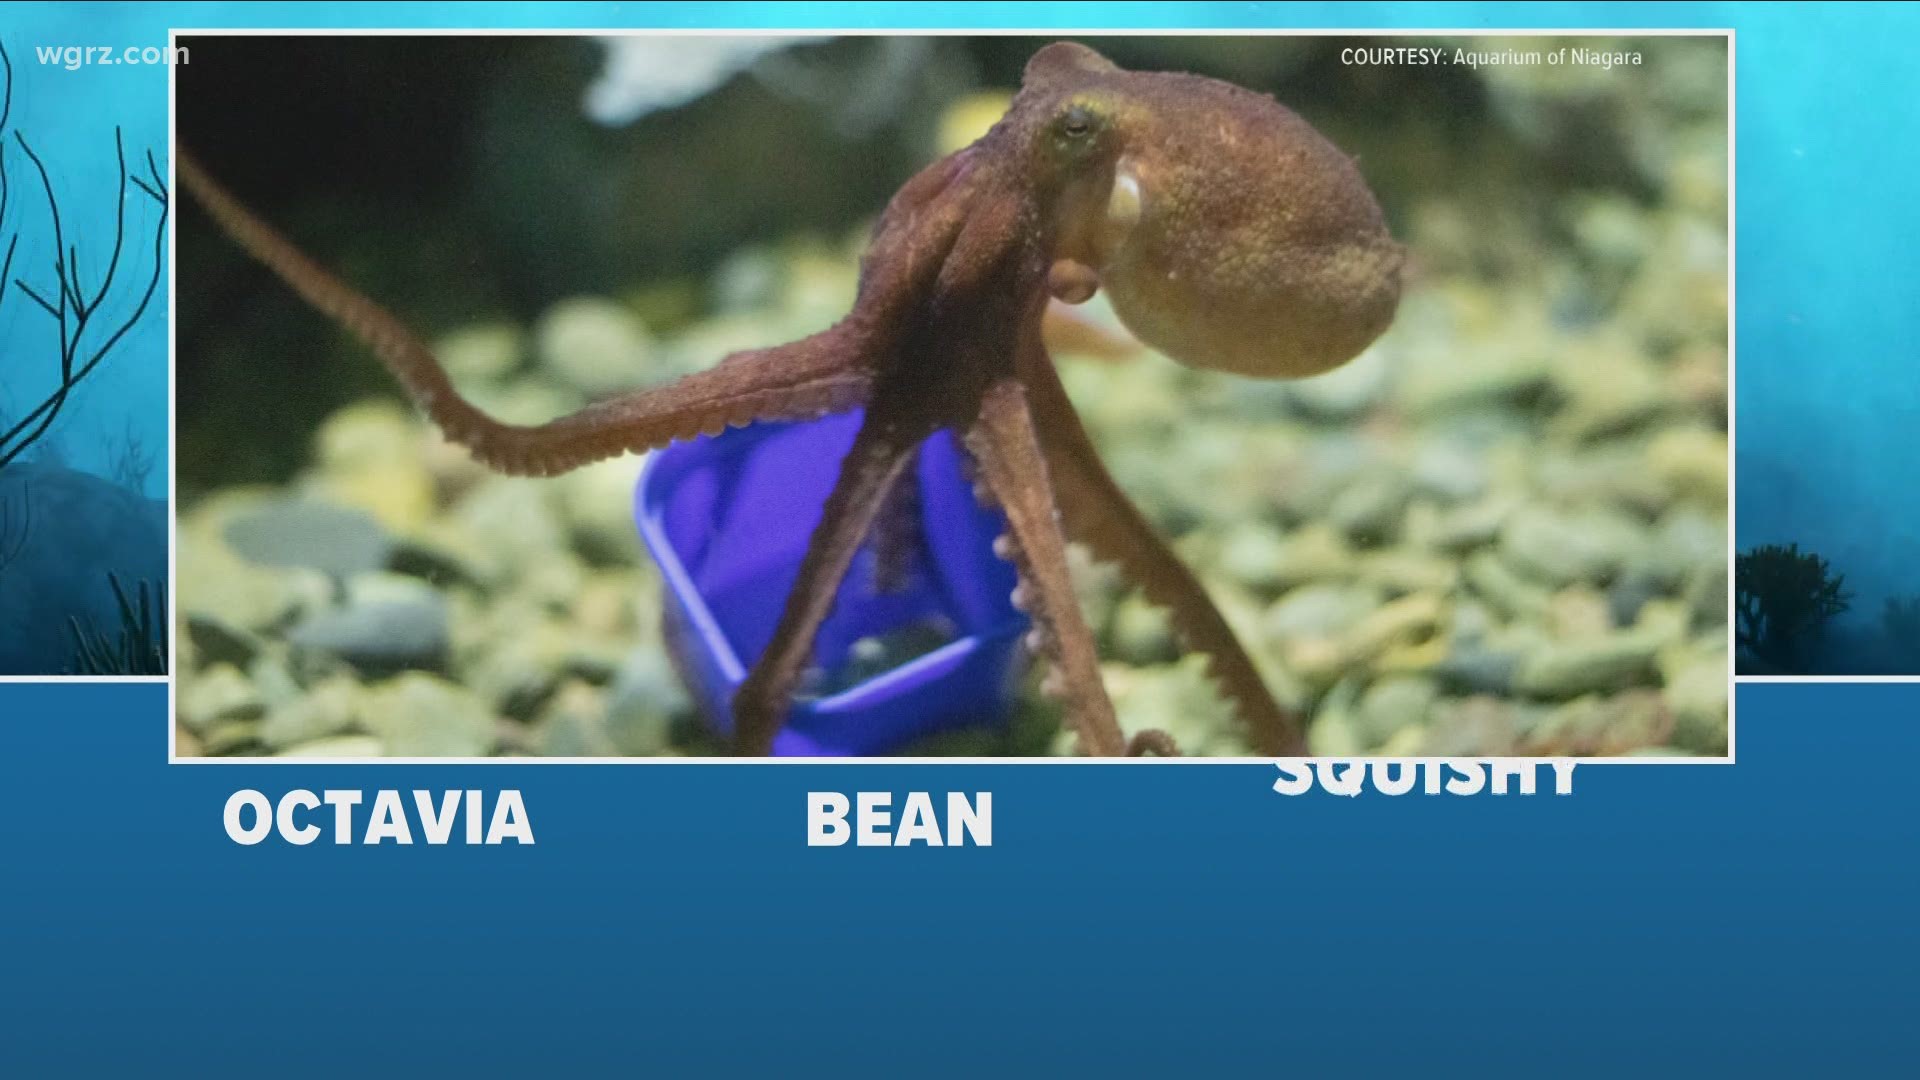 A few weeks ago we told you the Aquarium of Niagara put out a poll to name its new octopus, today the results came in.